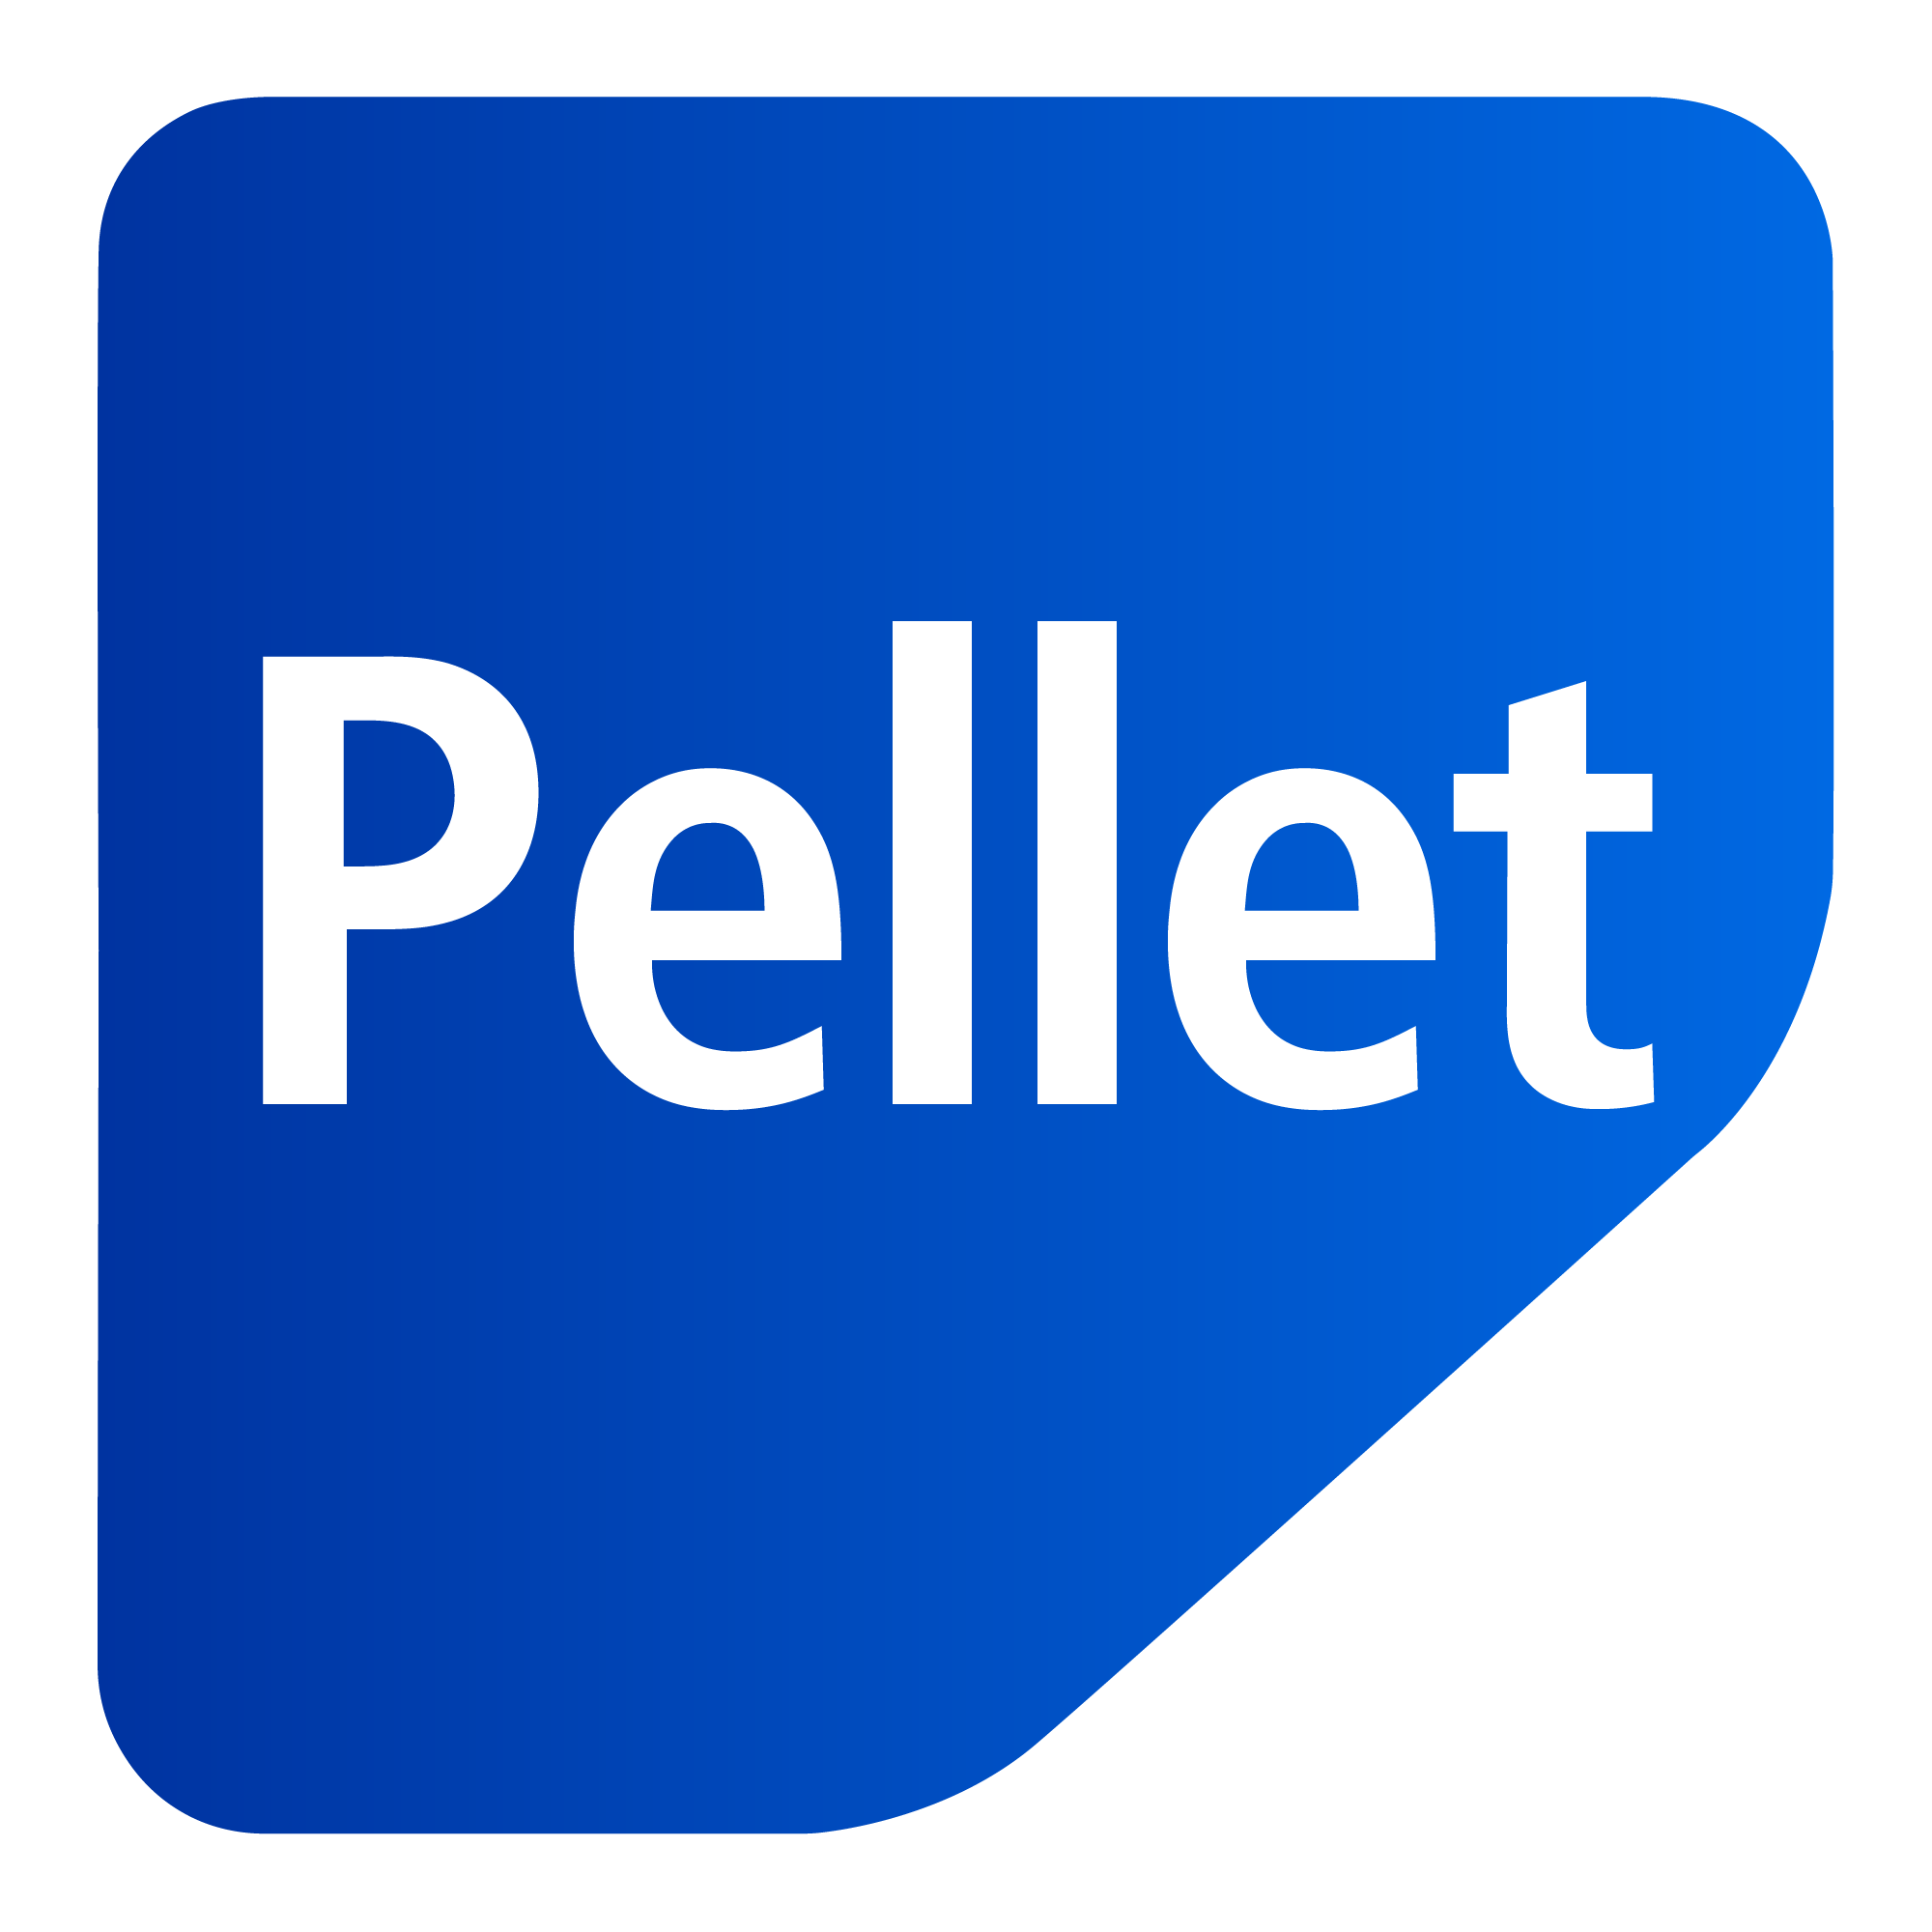 List of Behansar products in Pellet category